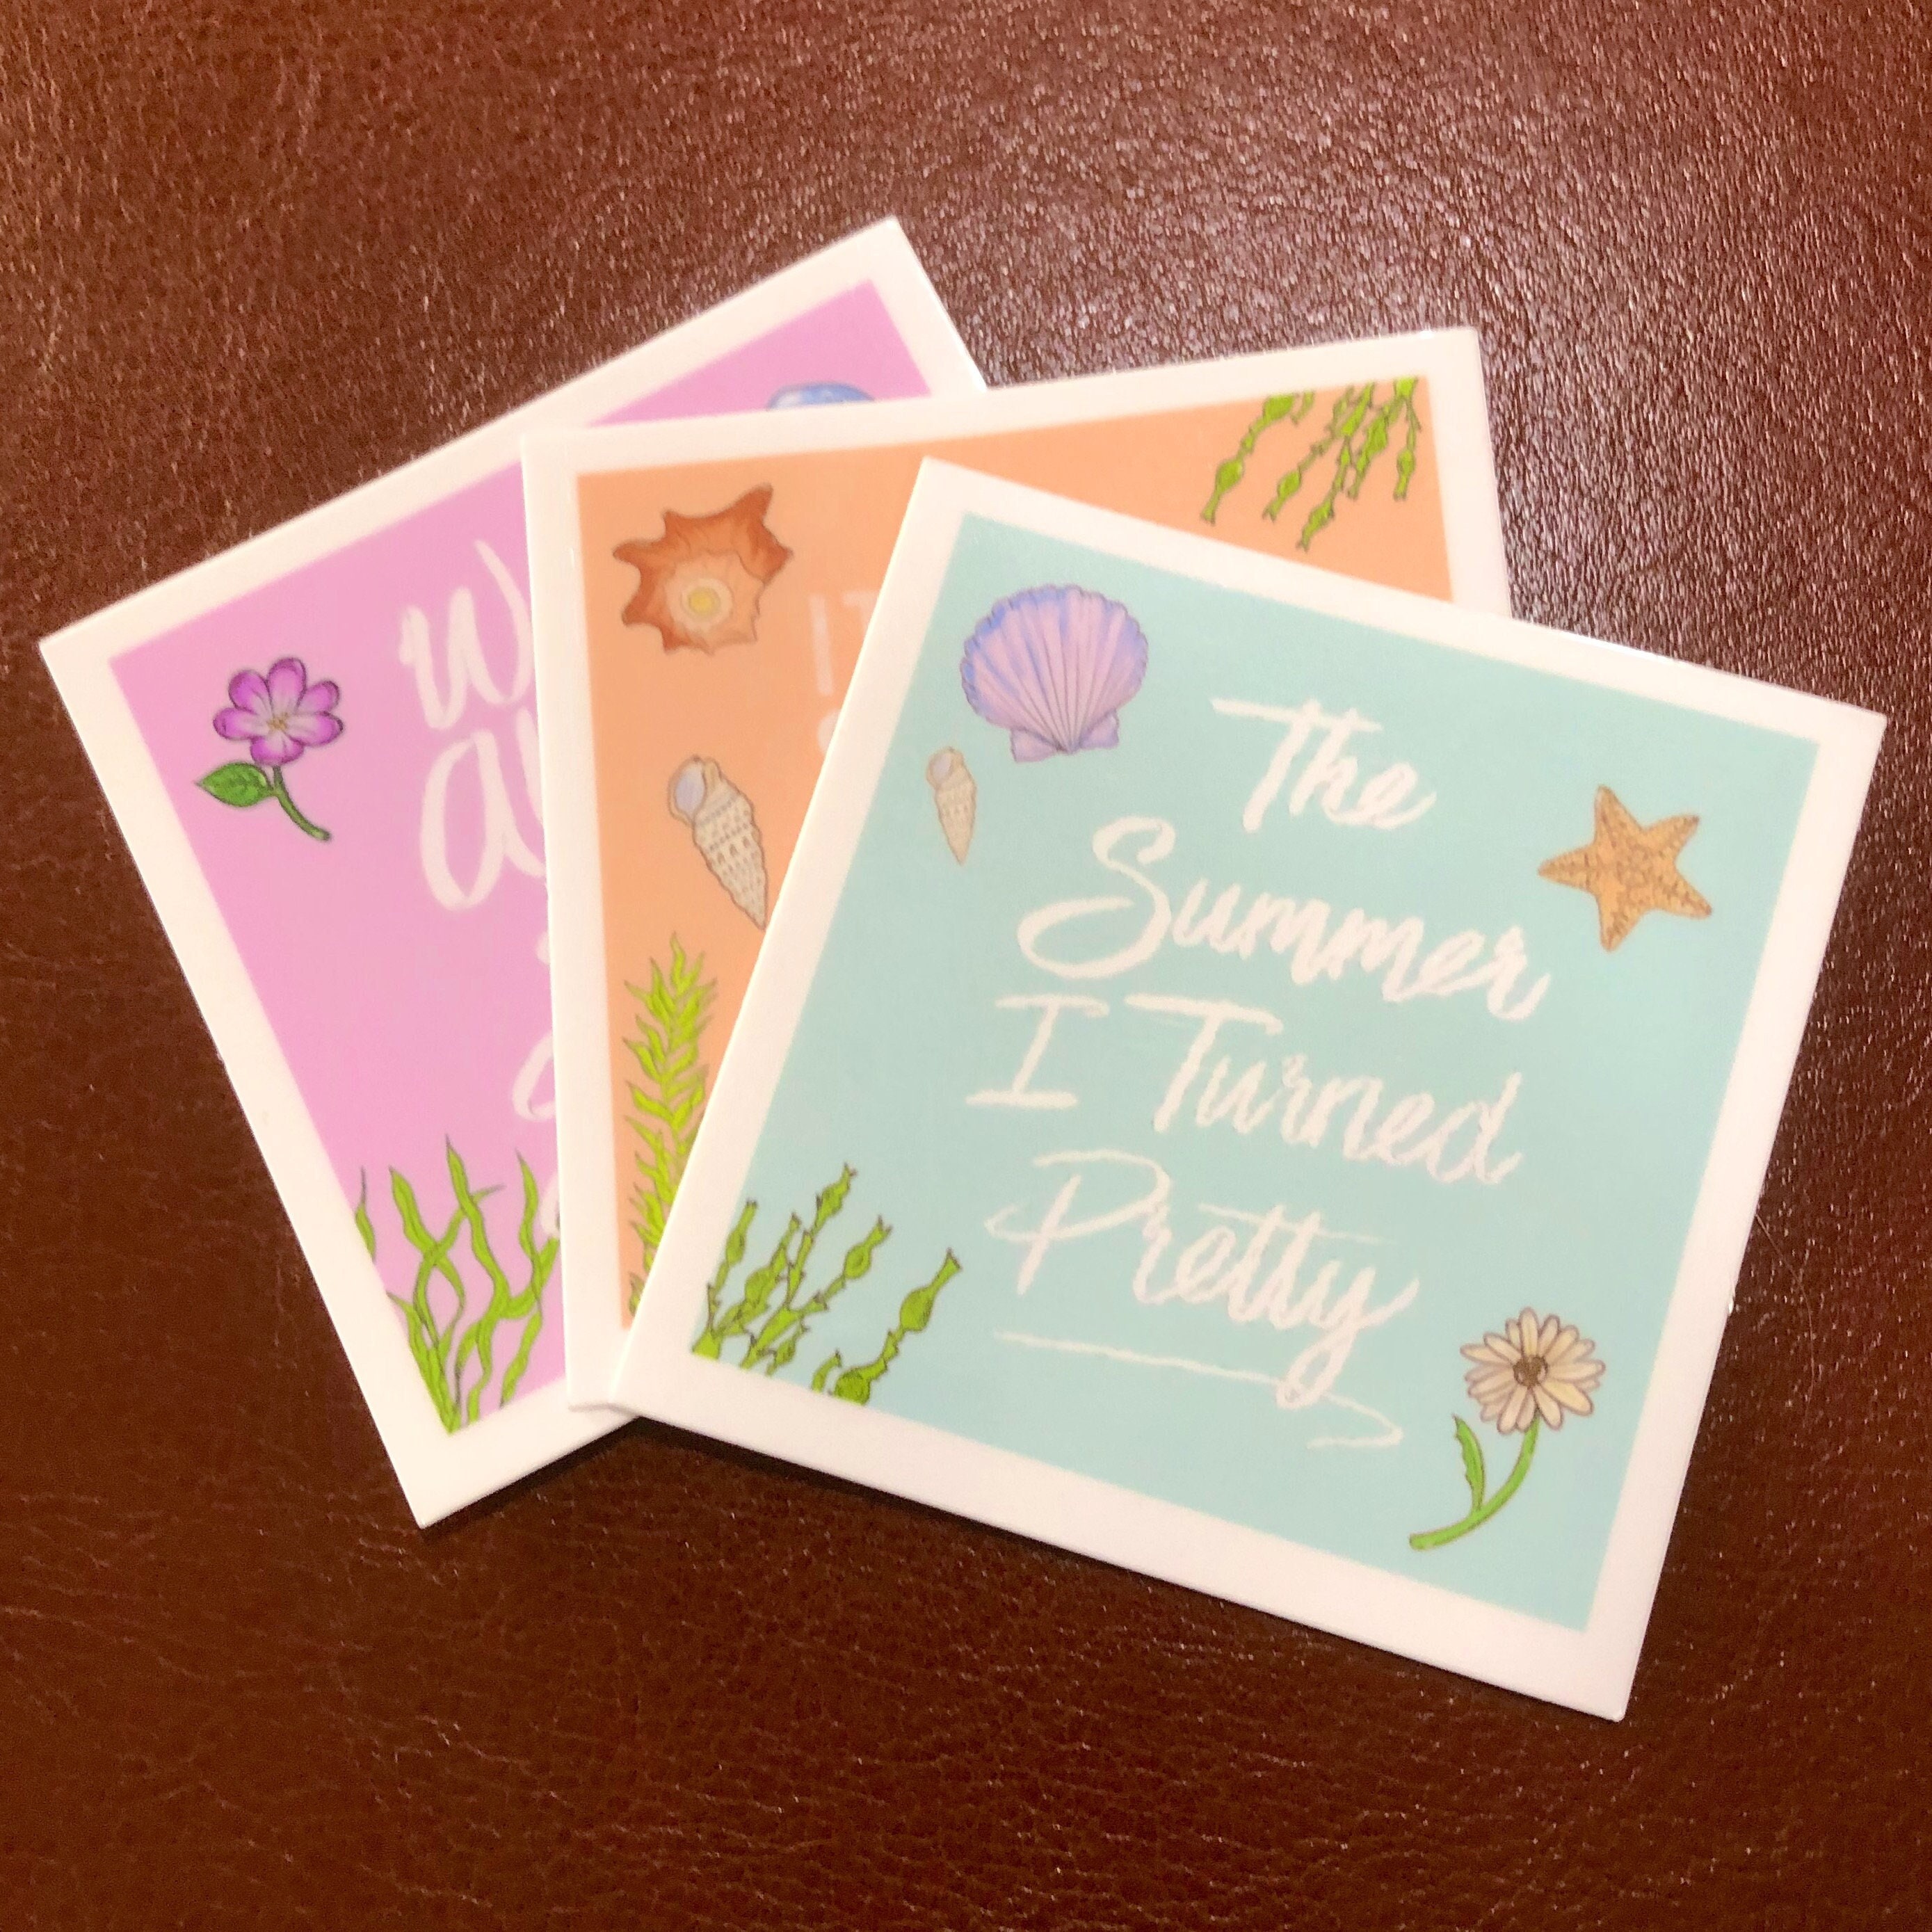 50Pcs The Summer I Turned Pretty Stickers - Wholesale Stickers